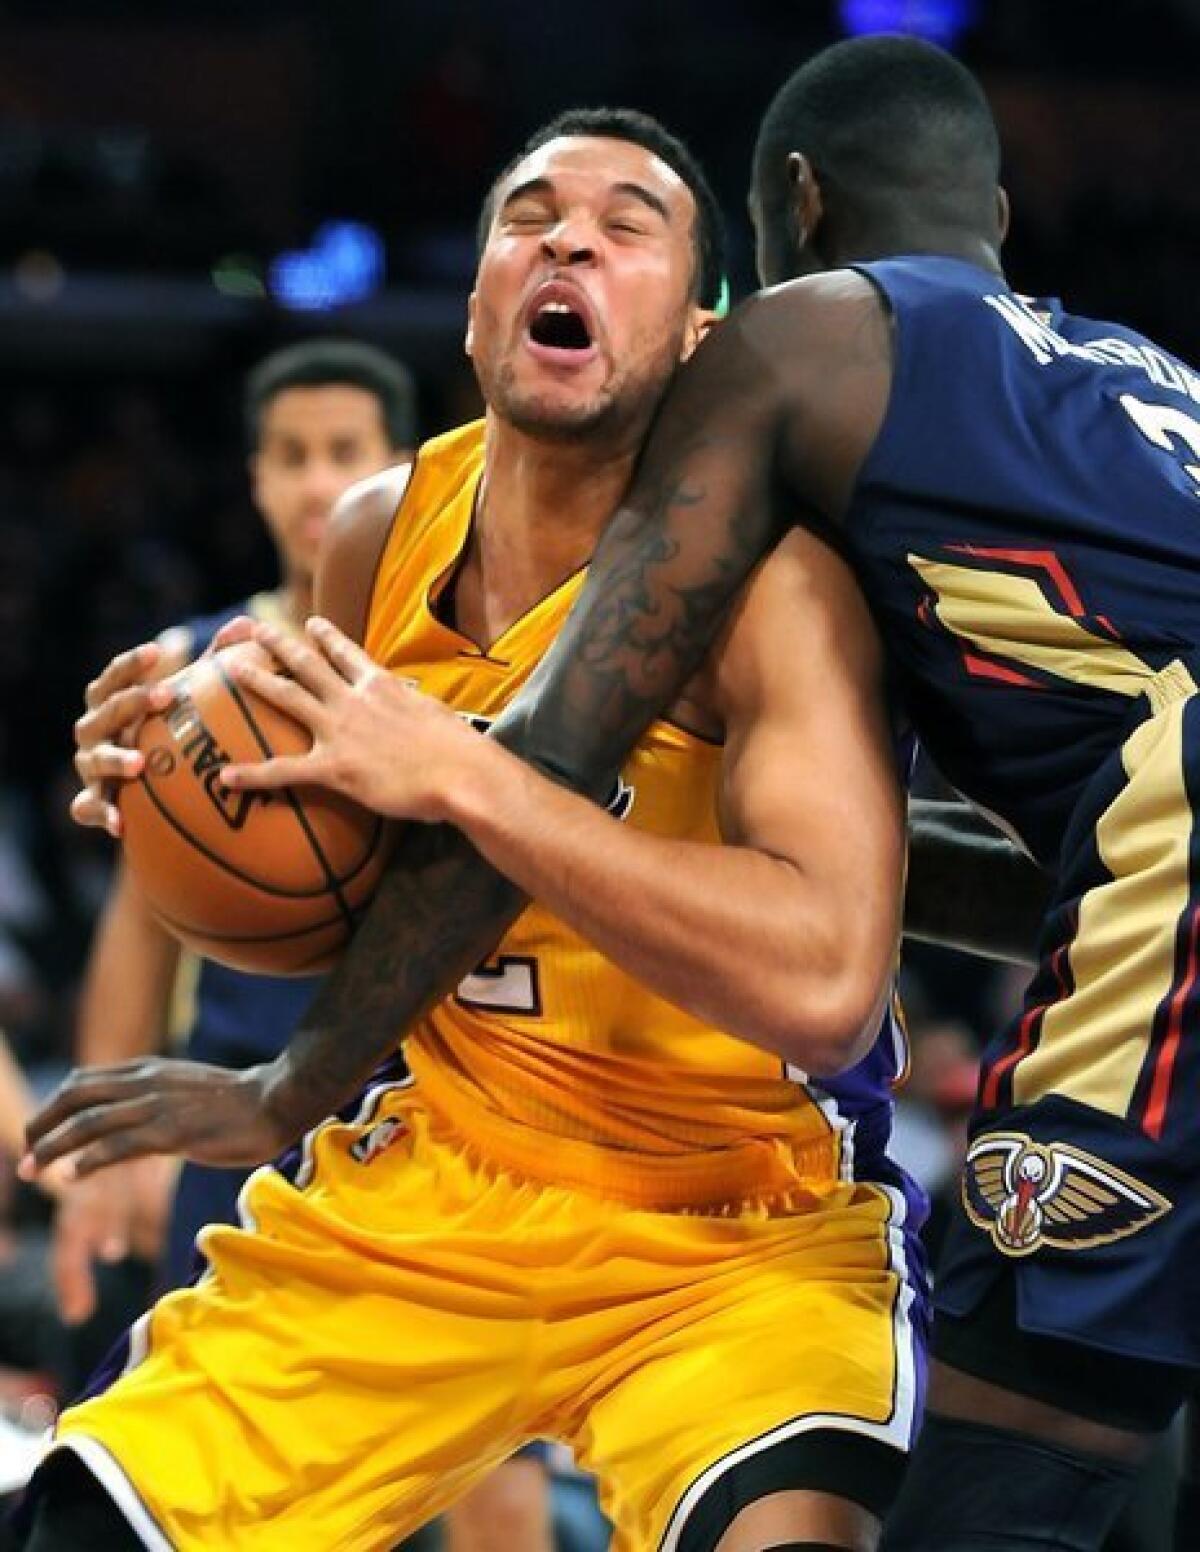 The Lakers' Elias Harris is fouled by the Pelicans' Anthony Morrow while driving to the basket during the Lakers' 116-95 victory over New Orleans on Tuesday at Staples Center.